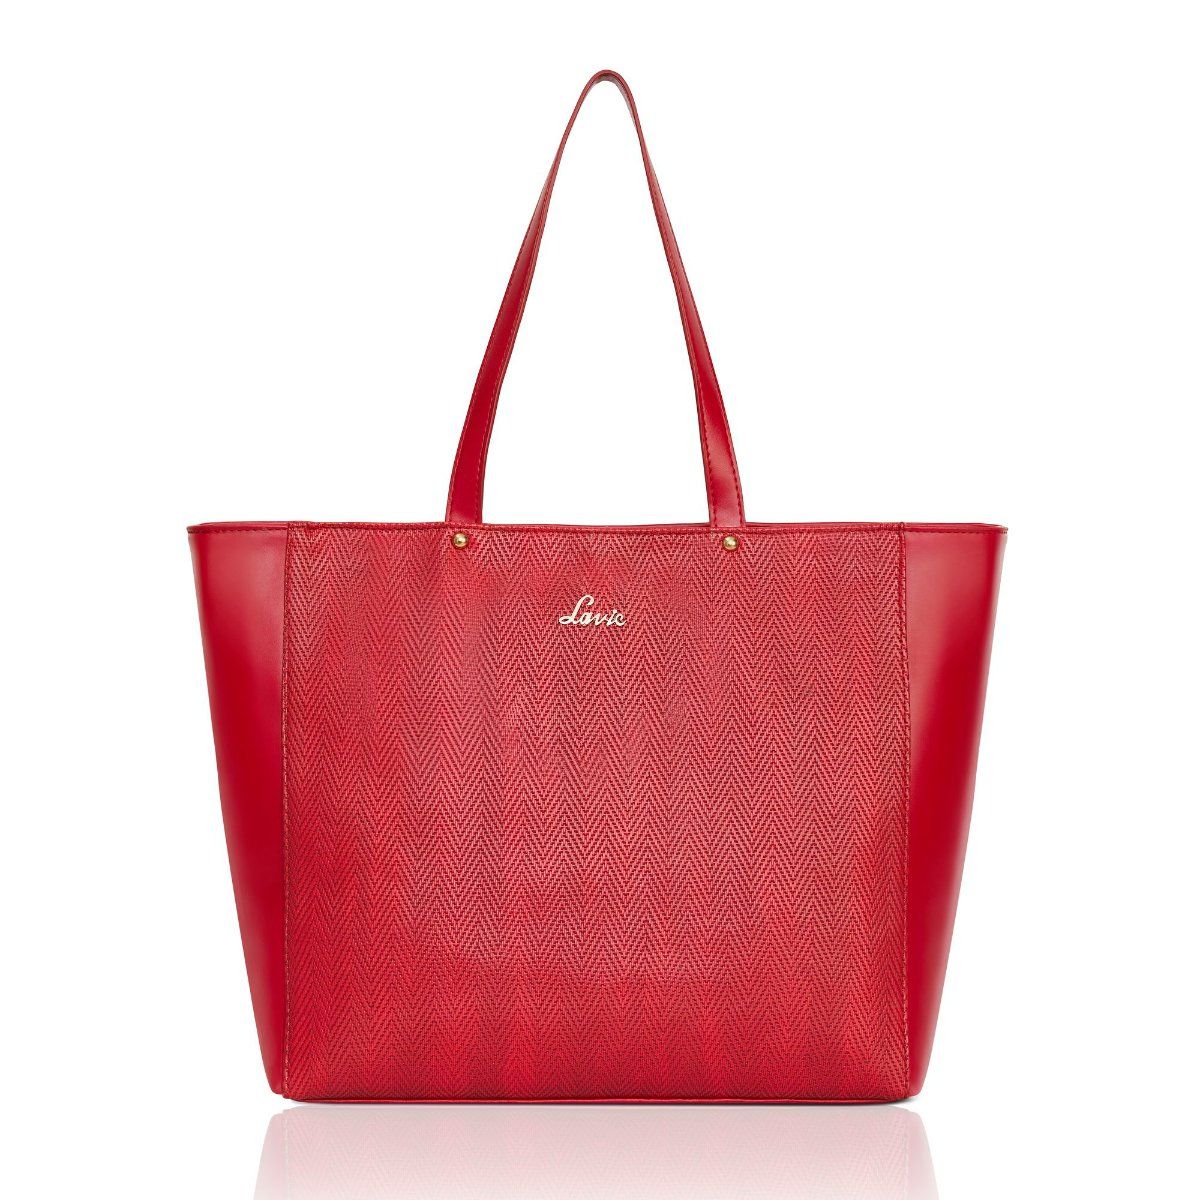 Lavie Red Tote Bag, Best Tote For Everyday